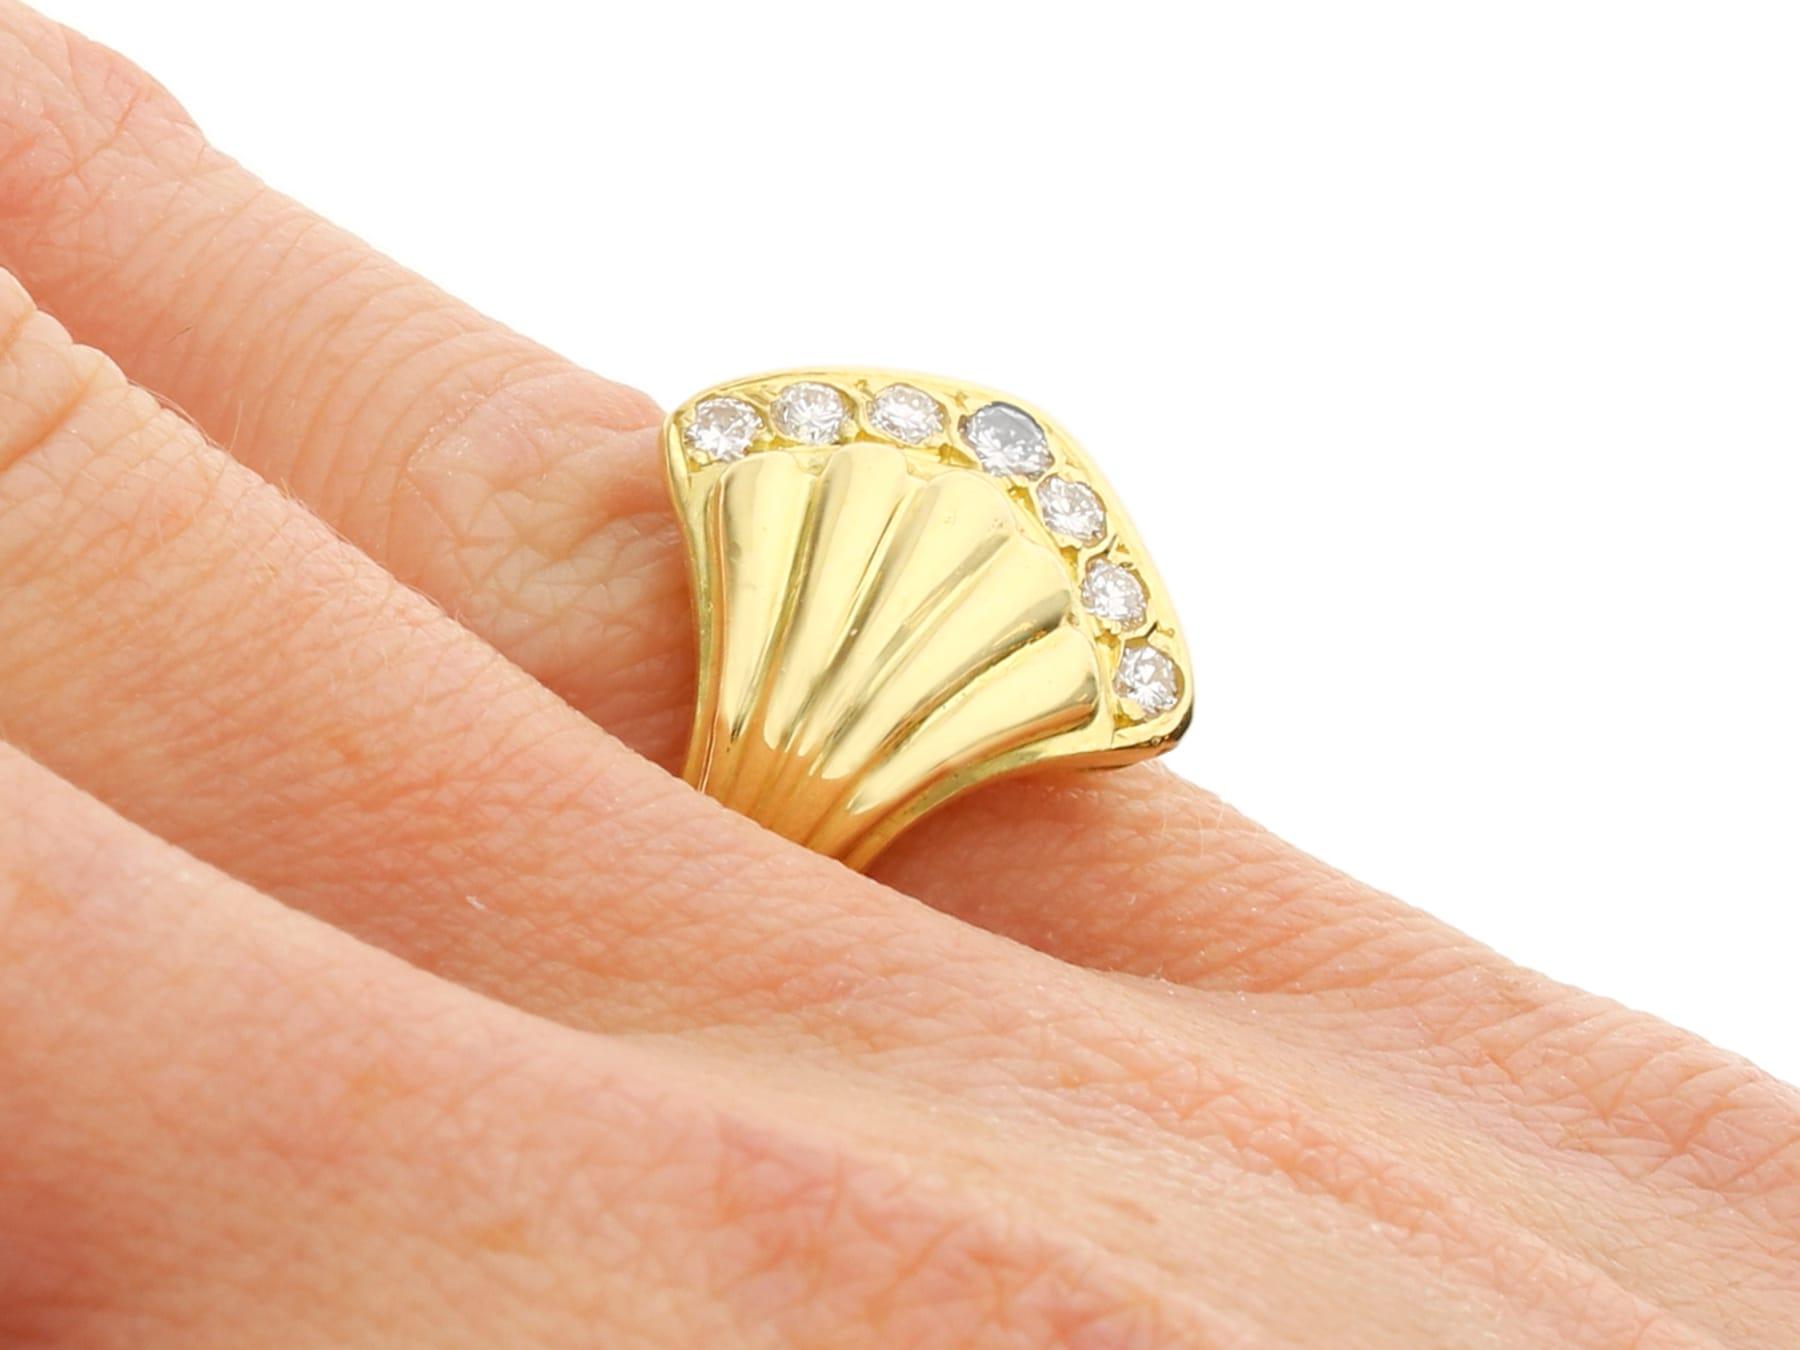 1950s Vintage 0.18 Carat Diamond and 18k Yellow Gold Dress Ring For Sale 3